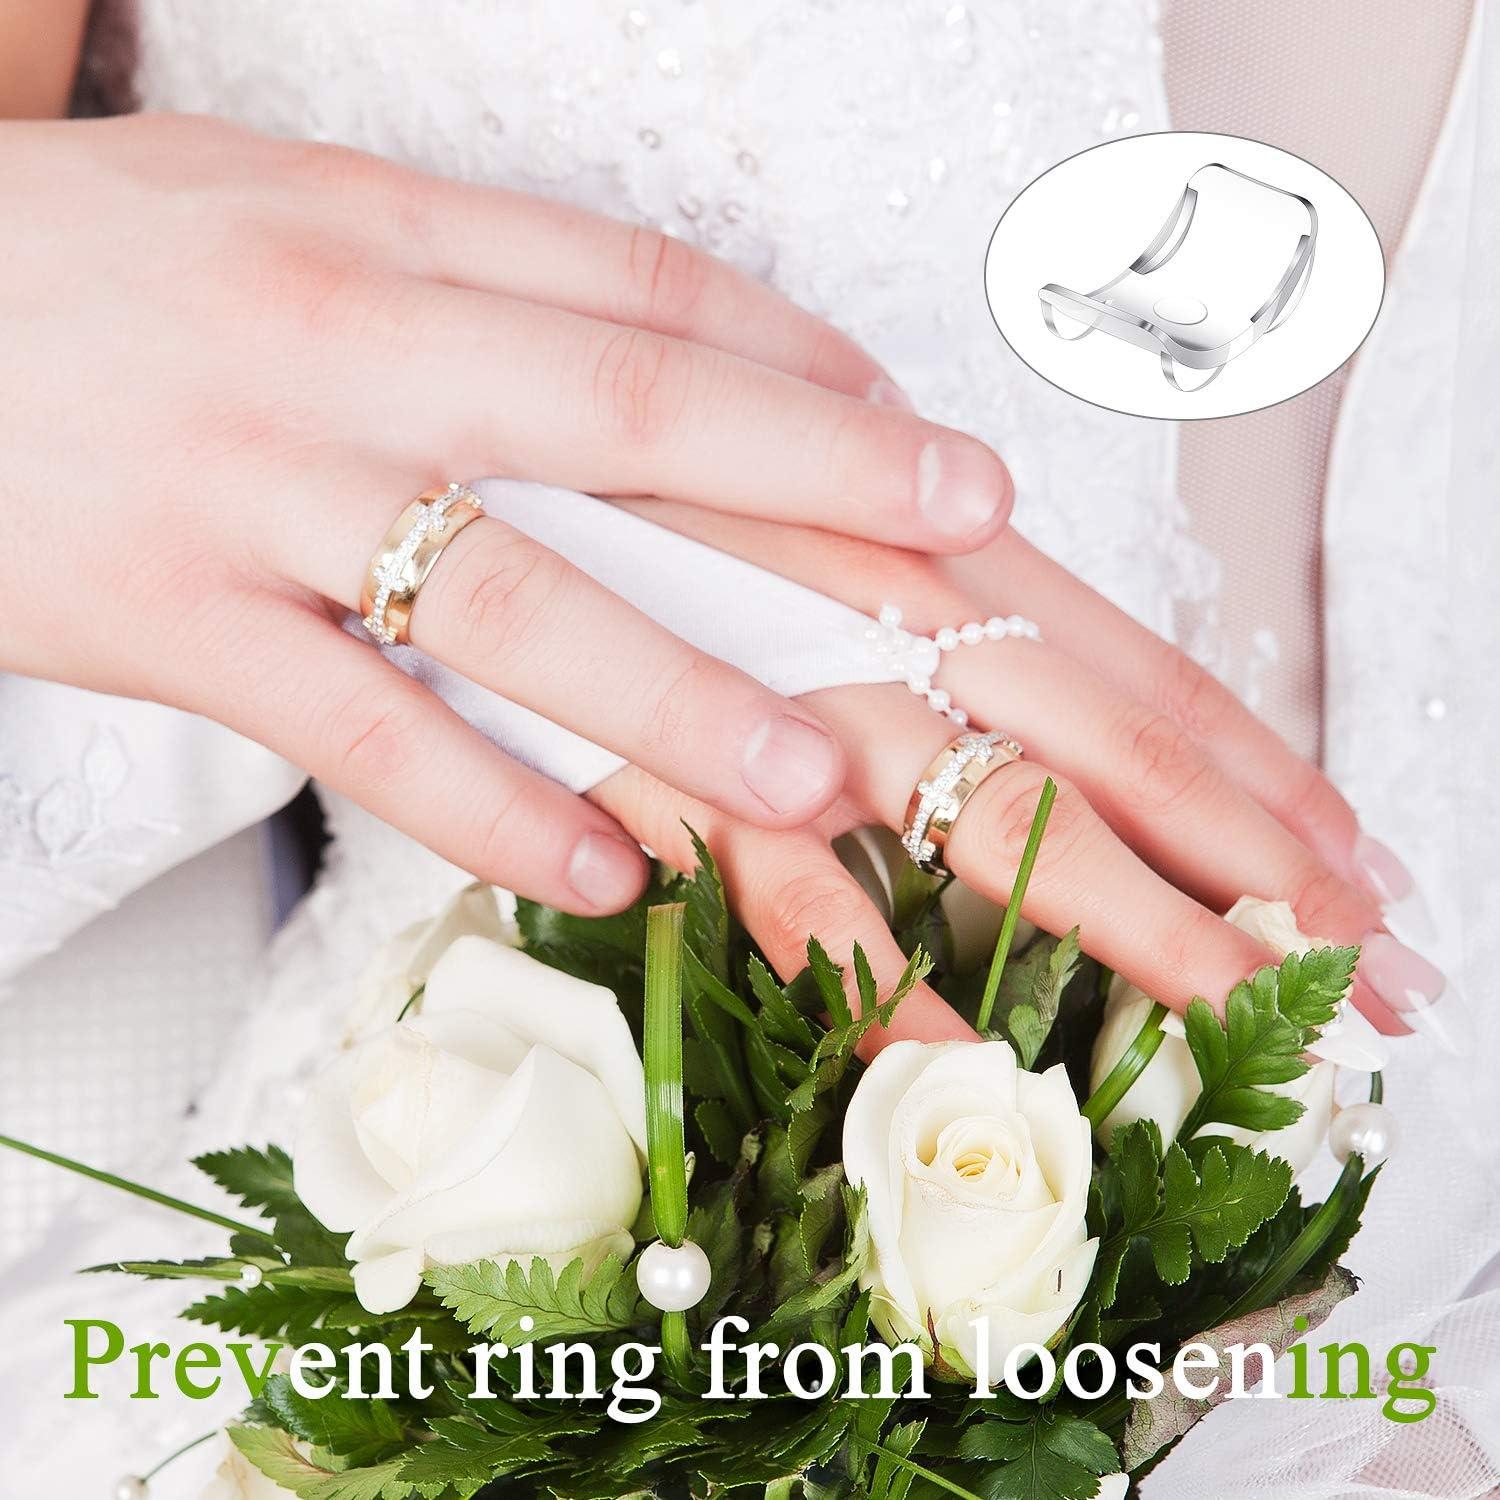 12 Sizes Ring Size Adjuster Ring Tightener for Loose Rings Ring Reducer  Invisible, Ring Adjuster, Ring Resizer, Ring Clips to Make Rings Smaller  Adjuster, Make Ring Smaller Without Resizing : : Fashion